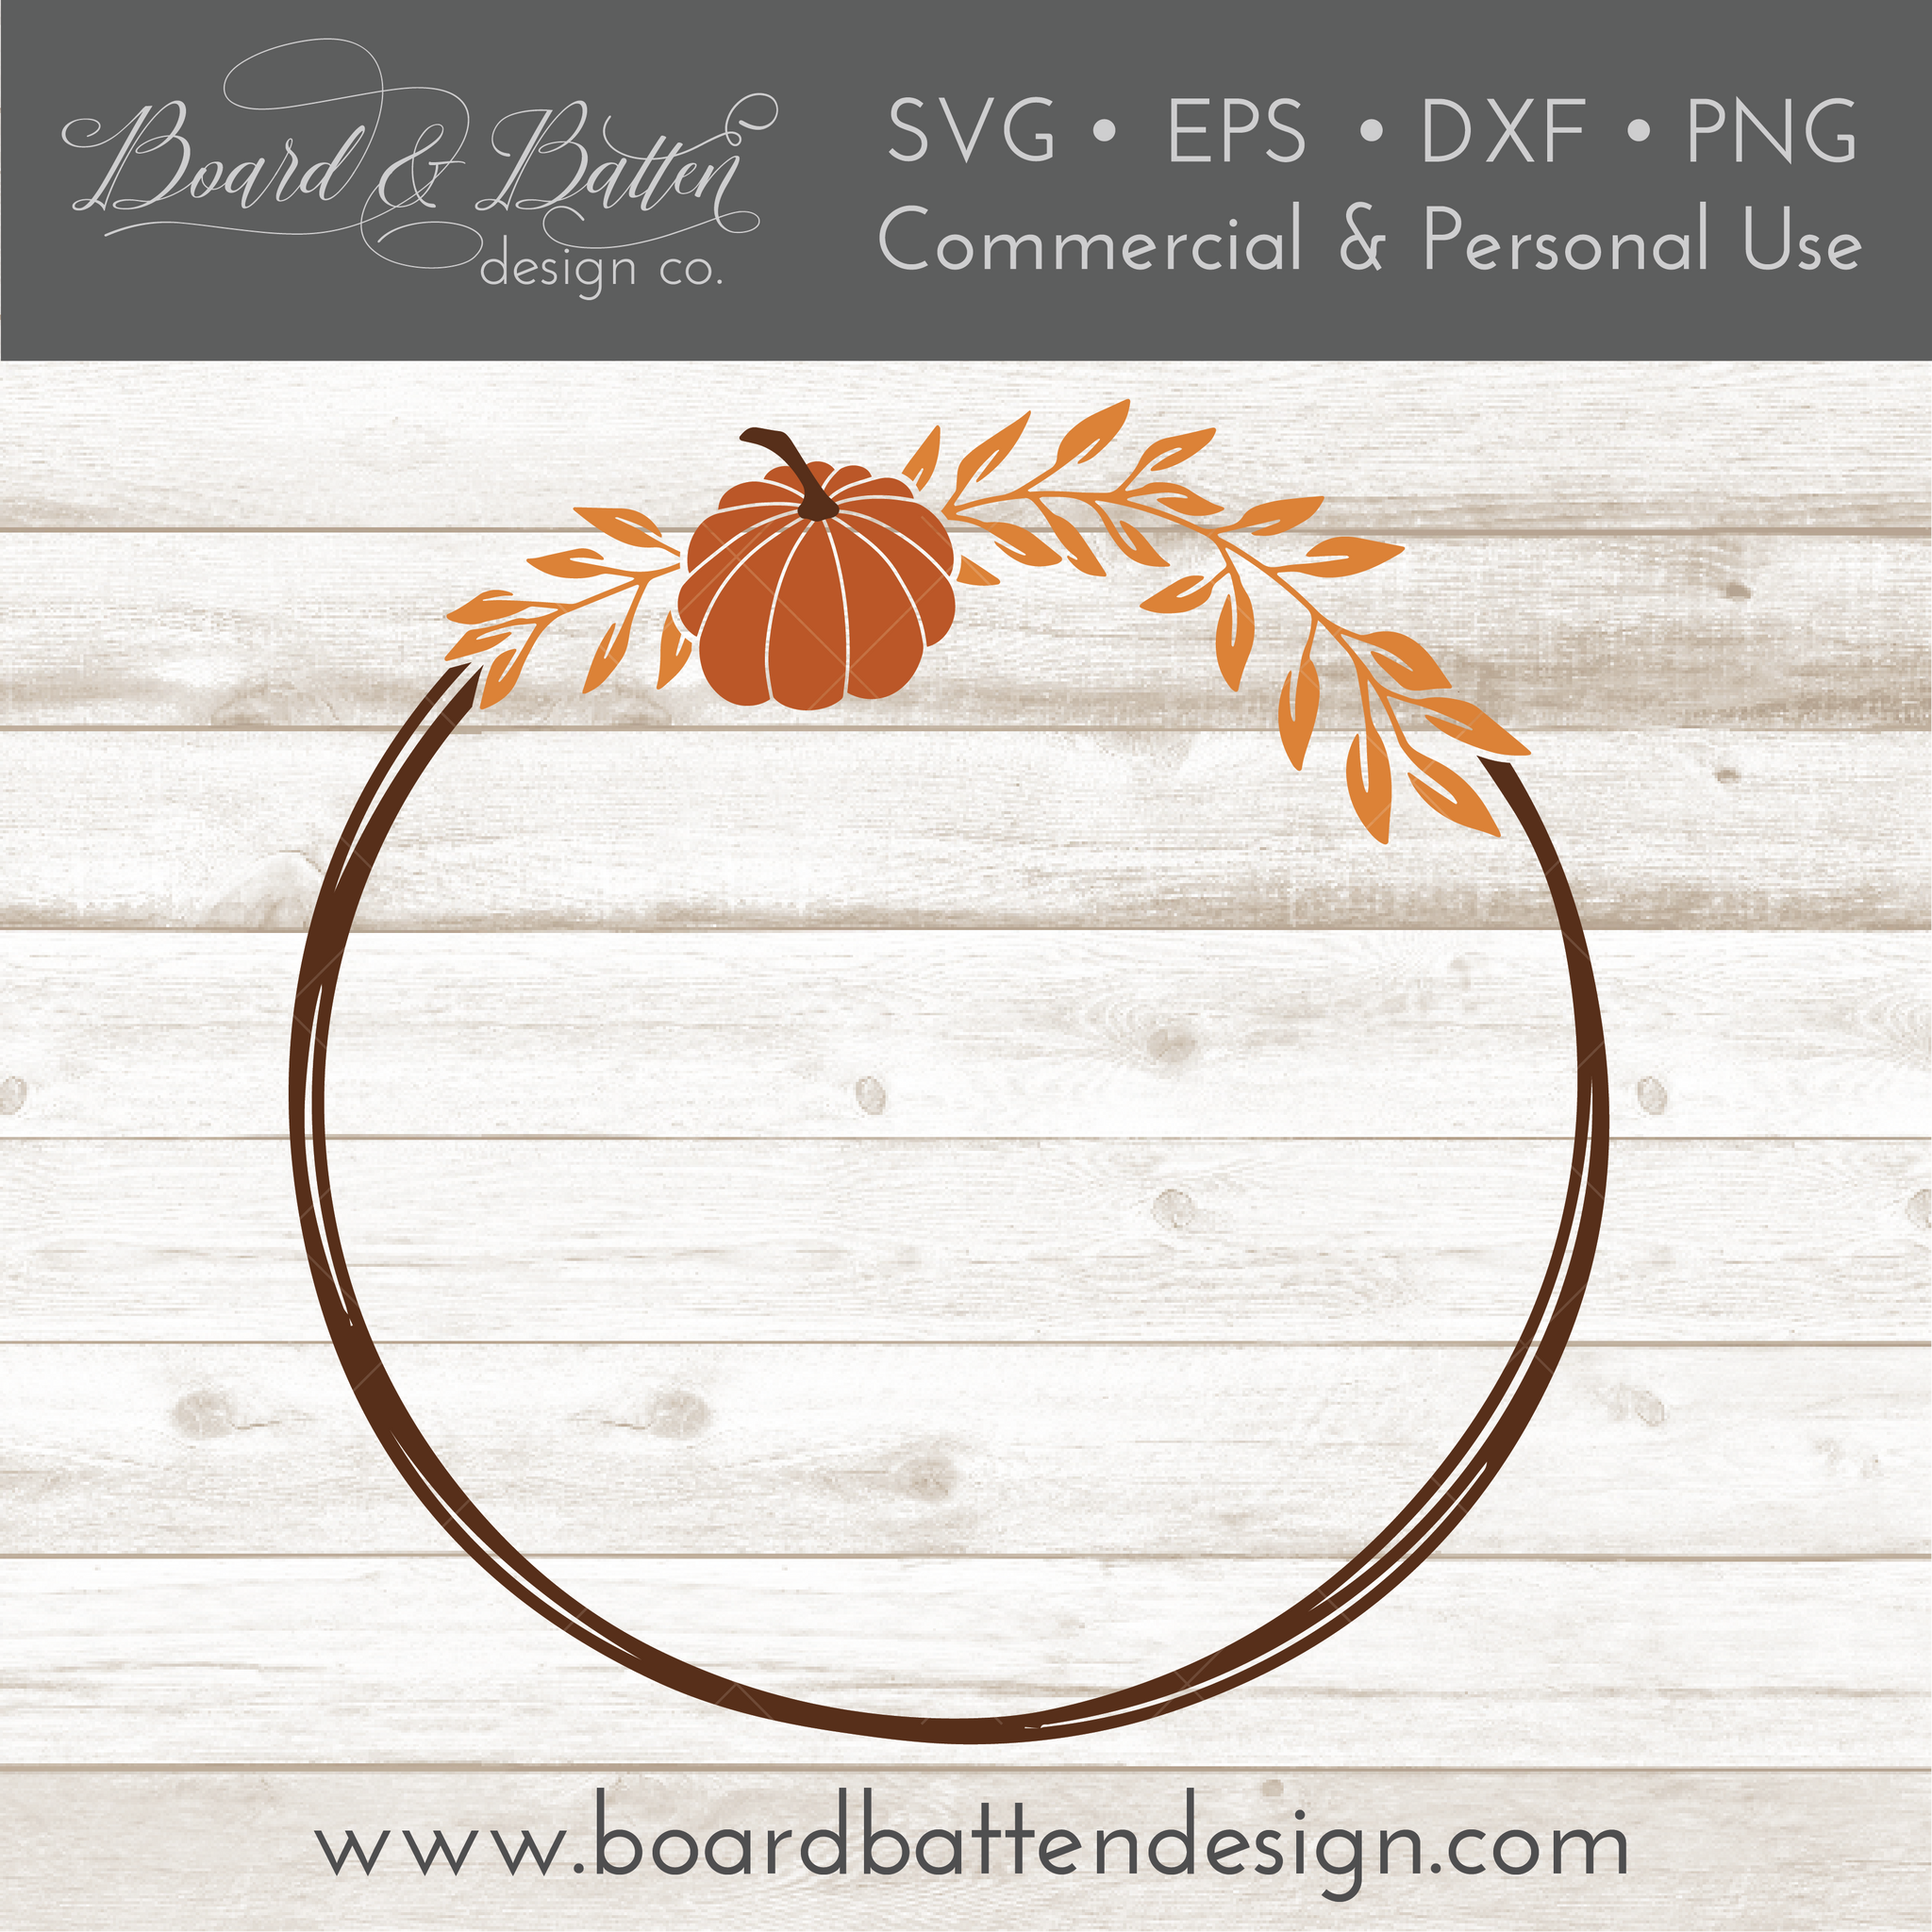 Fall/Autumn Round Frame Svg with Leaves & Pumpkin for Cricut/Silhouette - Commercial Use SVG Files for Cricut & Silhouette